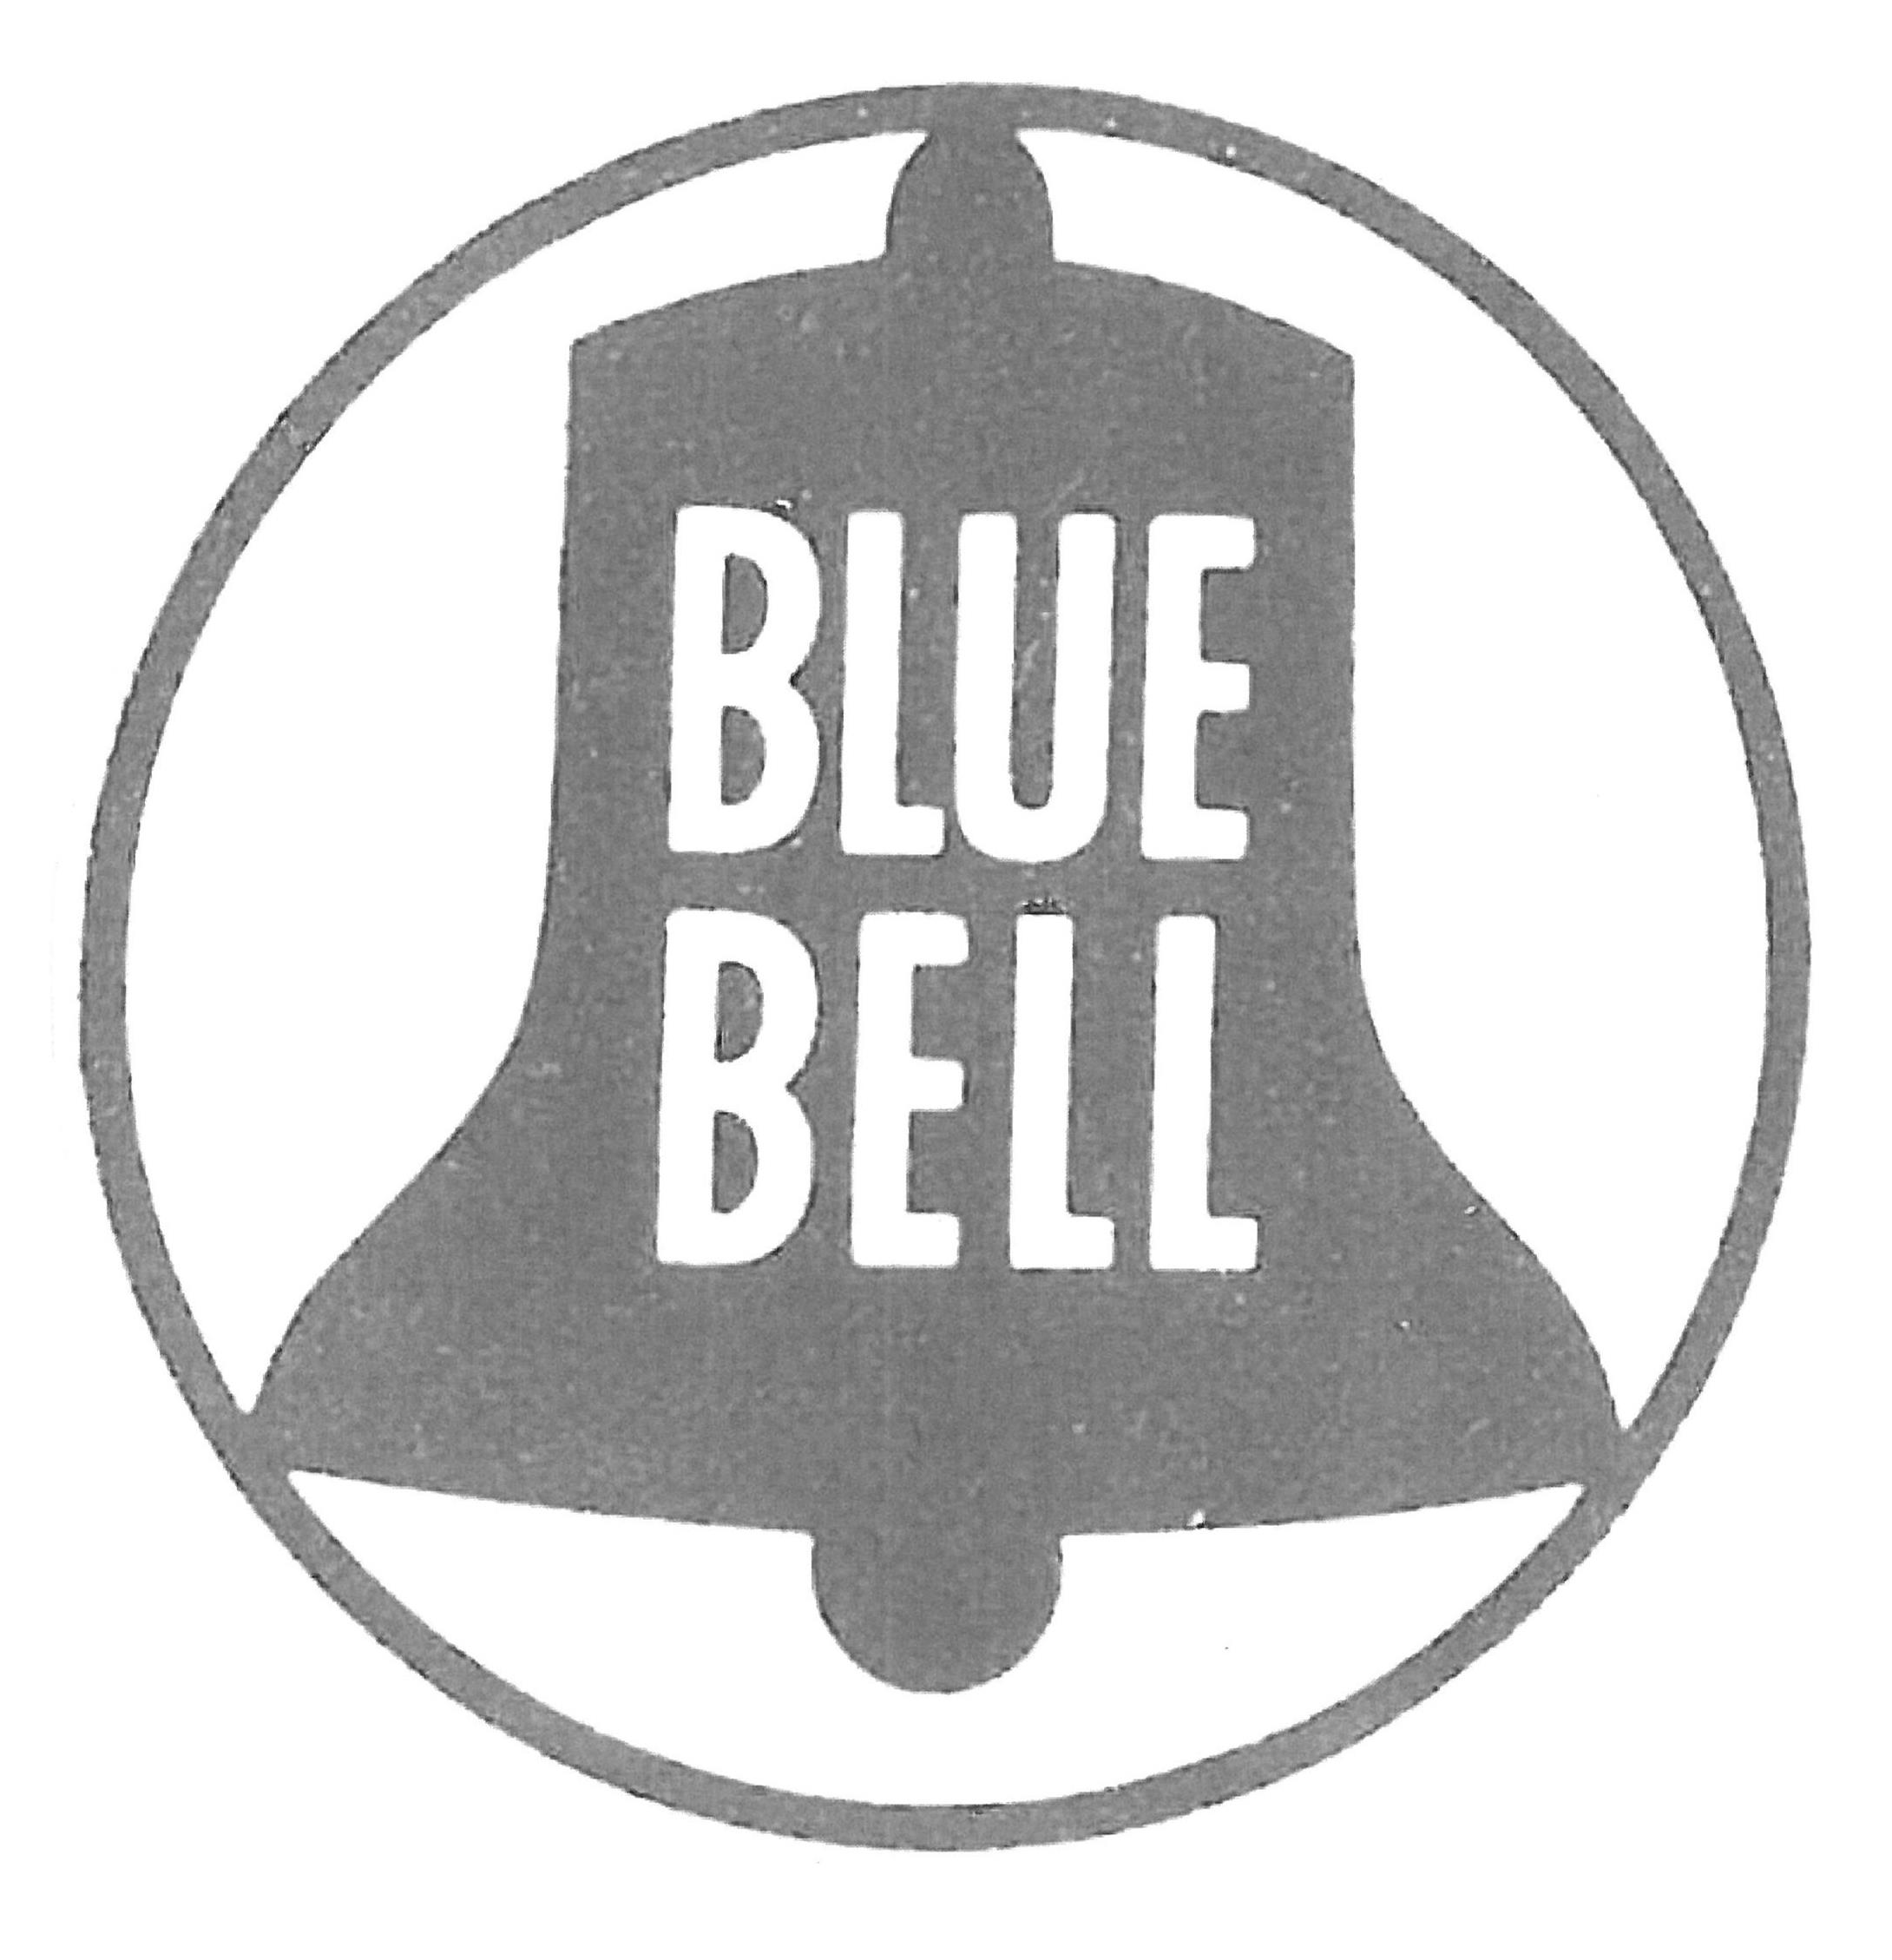  THE MARK CONSISTS OF THE WORDS &quot;BLUE BELL&quot; INSIDE A BELL DESIGN WITH A CIRCLE AROUND IT